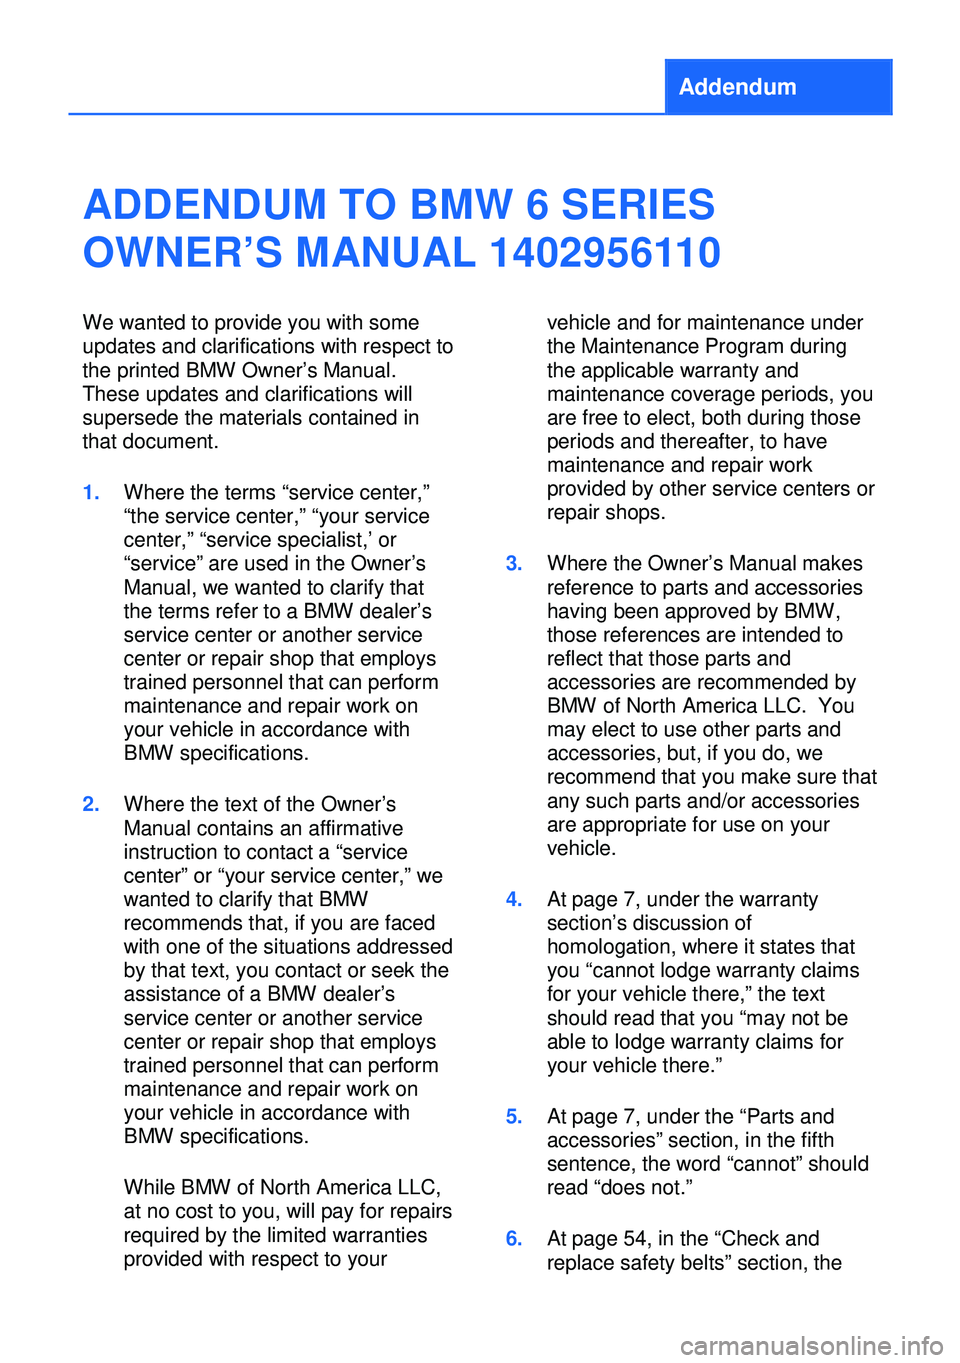 BMW 640I XDRIVE GRAN COUPE 2014  Owners Manual Addendum
ADDENDUM TO BMW 6 SERIES
OWNER’S MANUAL 1402956110
We wanted to provide you with some
updates and clarifications with respect to
the printed BMW Owner’s Manual.
These updates and clarific